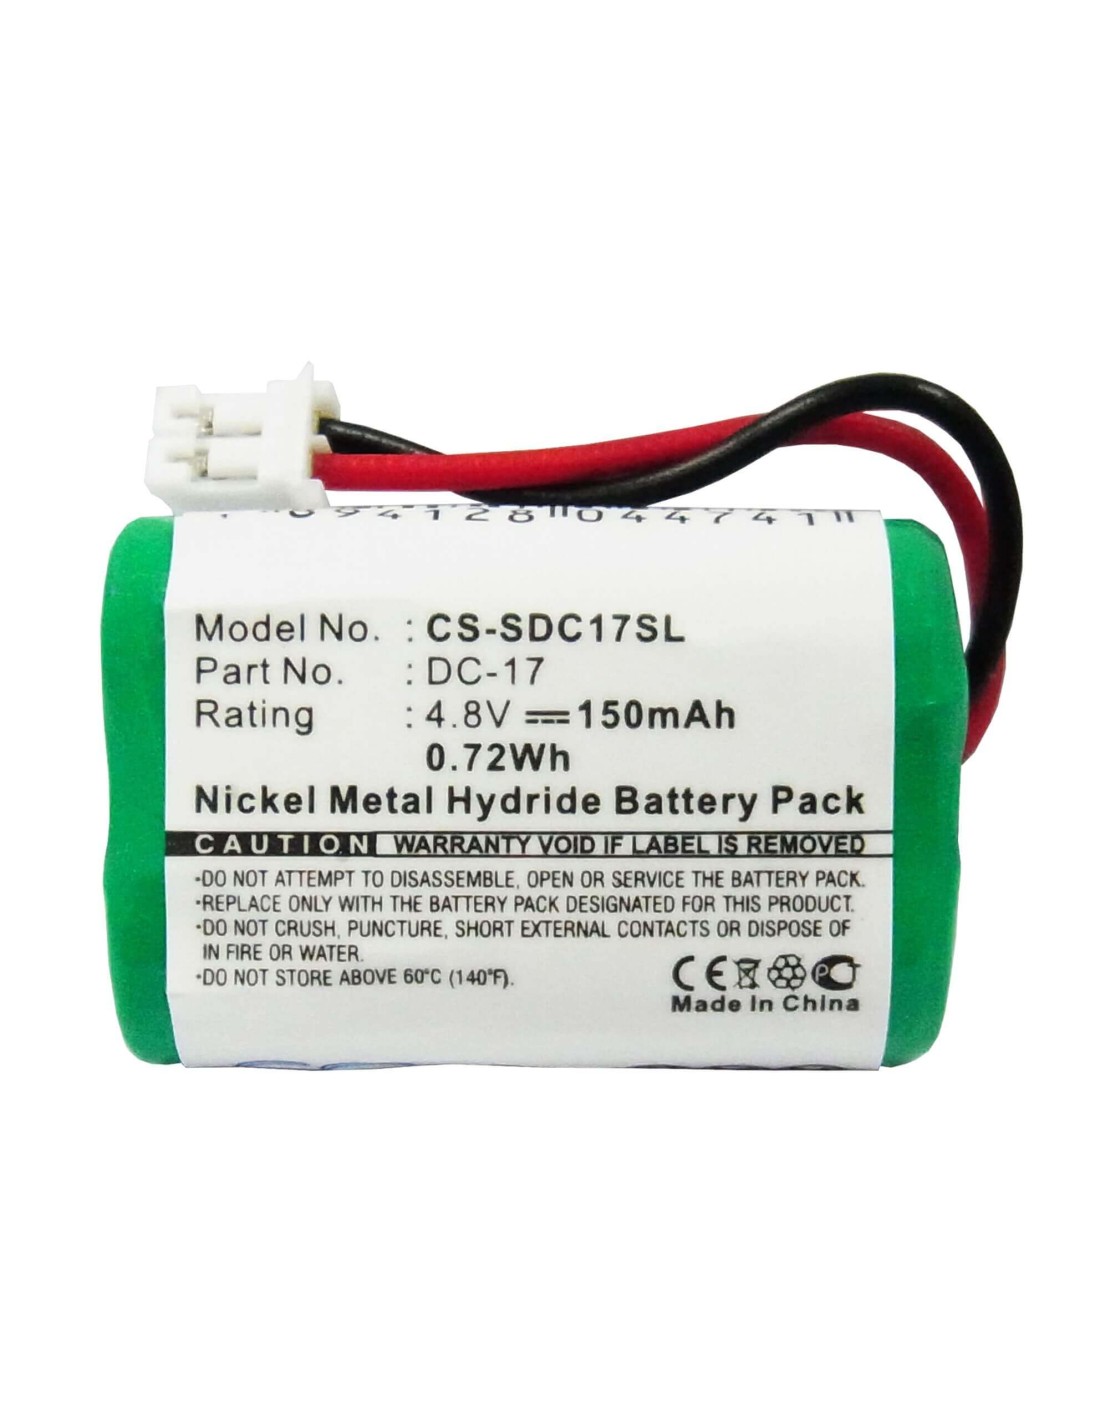 Battery for Kinetic Mh120aaal4gc 4.8V, 150mAh - 0.72Wh